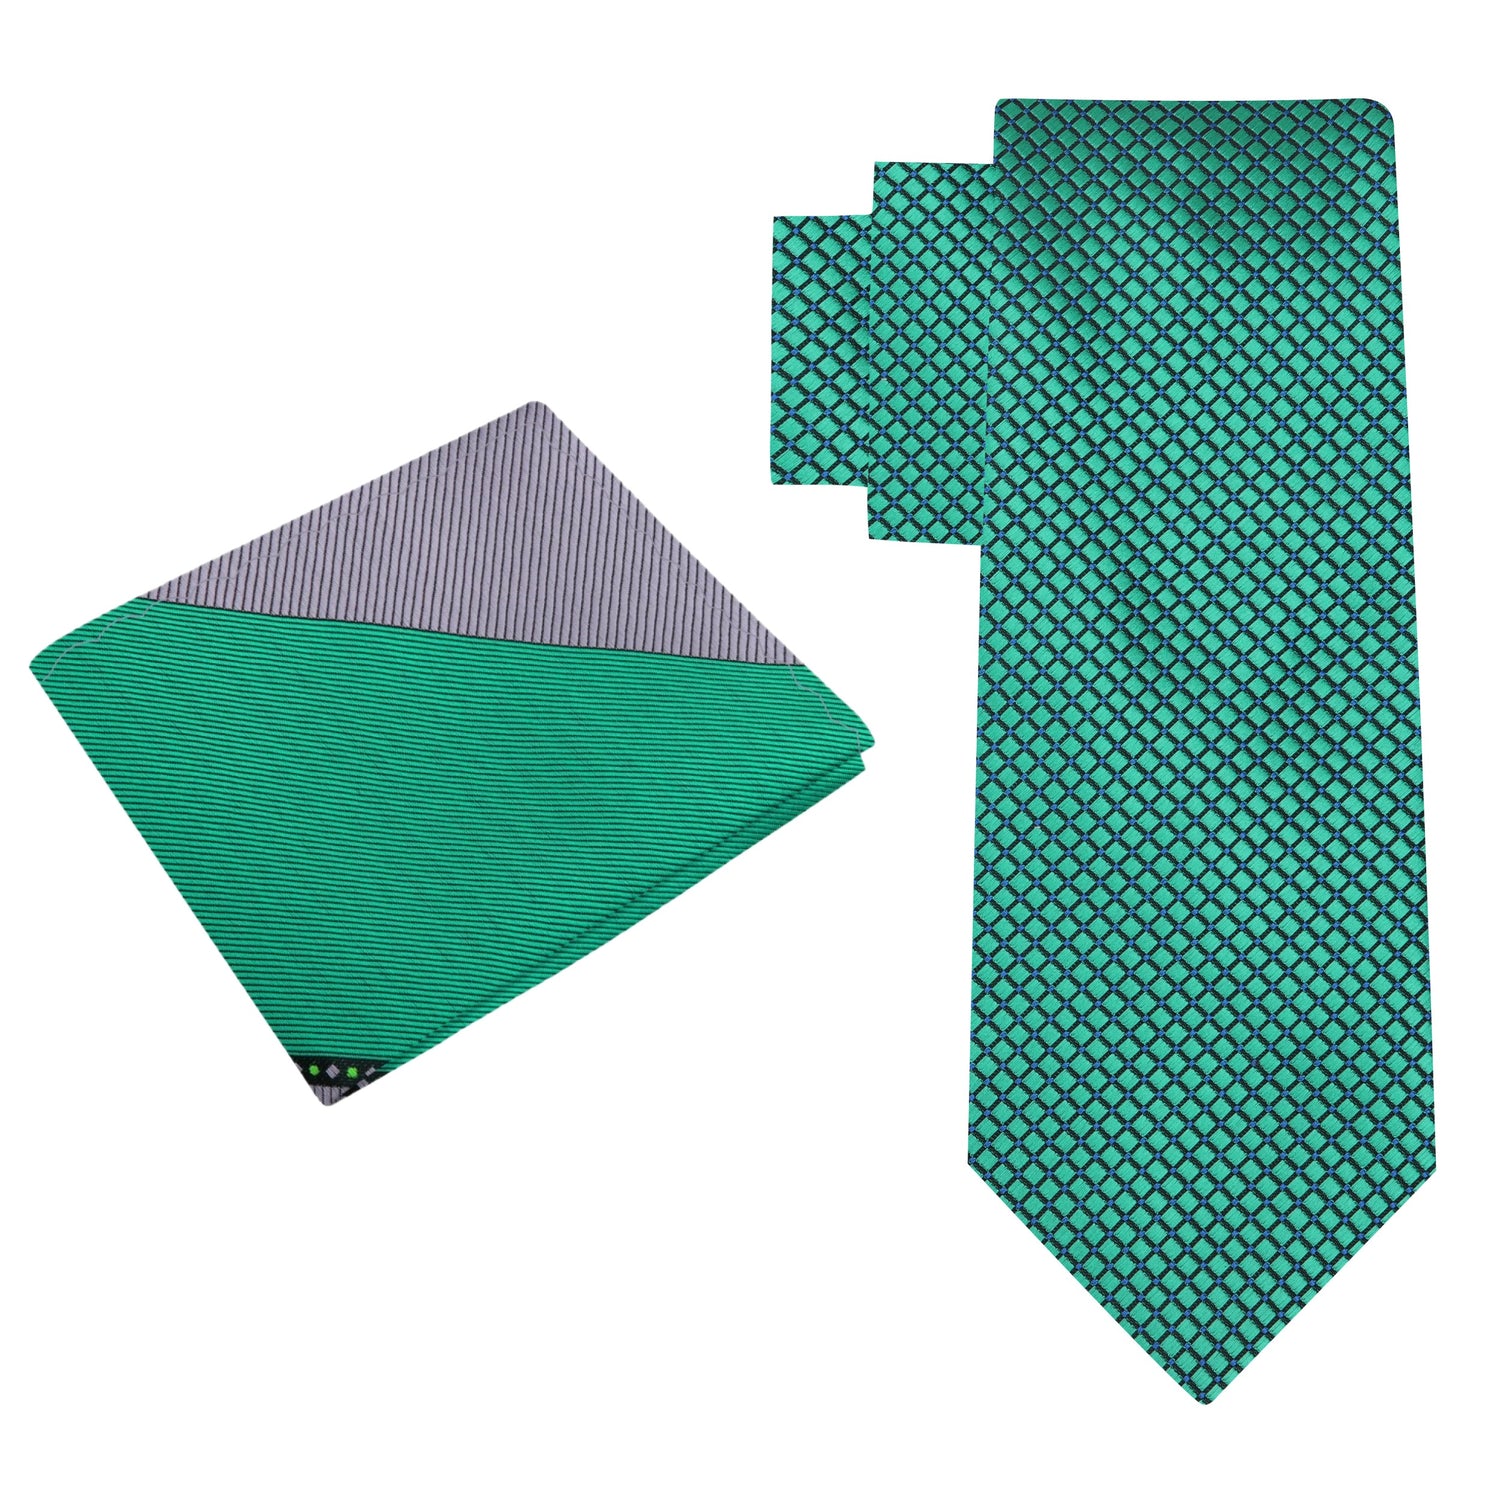 Alt View: Green Geometric Tie with Grey and Green Abstract Square